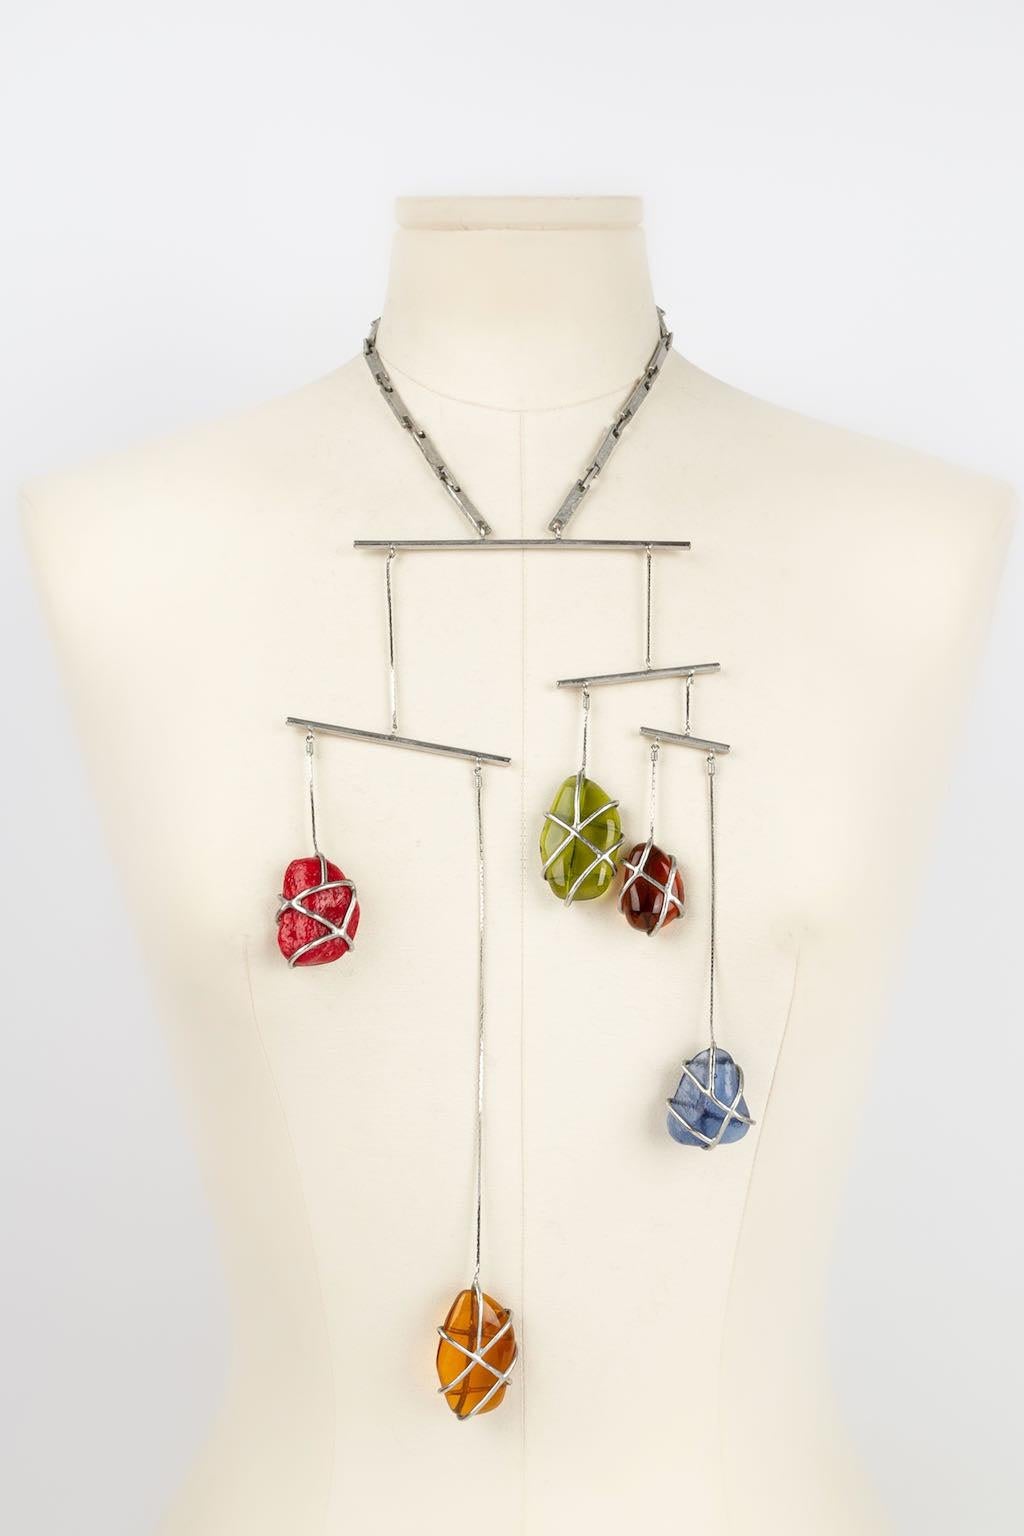 Jean Paul Gaultier -Silvered metal necklace holding multicolored stones. Jewel of the 1990's, inspired by mobile art.

Additional information: 
Dimensions: Length: from 39 cm to 44 cm - Height: 19 cm
Condition: Very good condition
Seller Ref number: